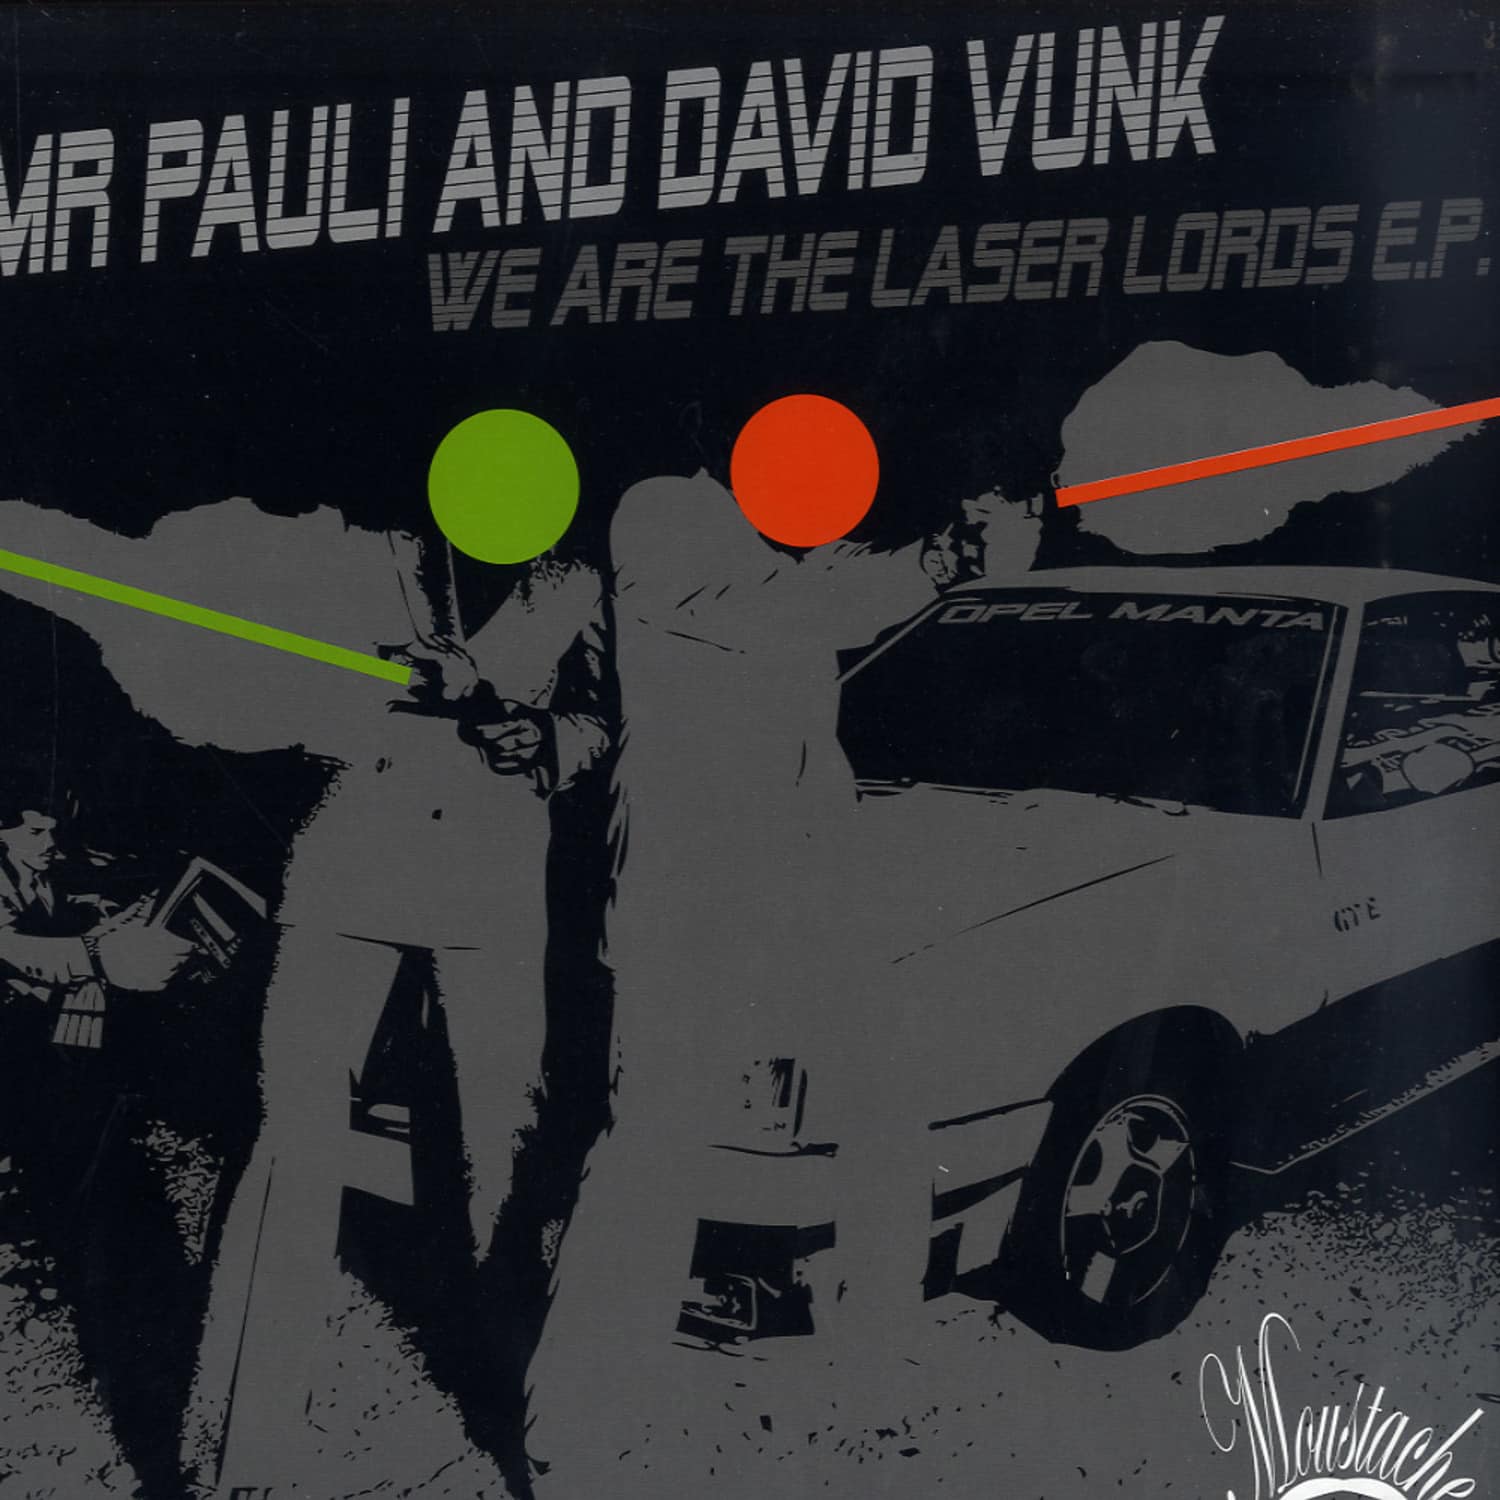 Mr Pauli & David Vunk - WE ARE THE LASER LORDS EP